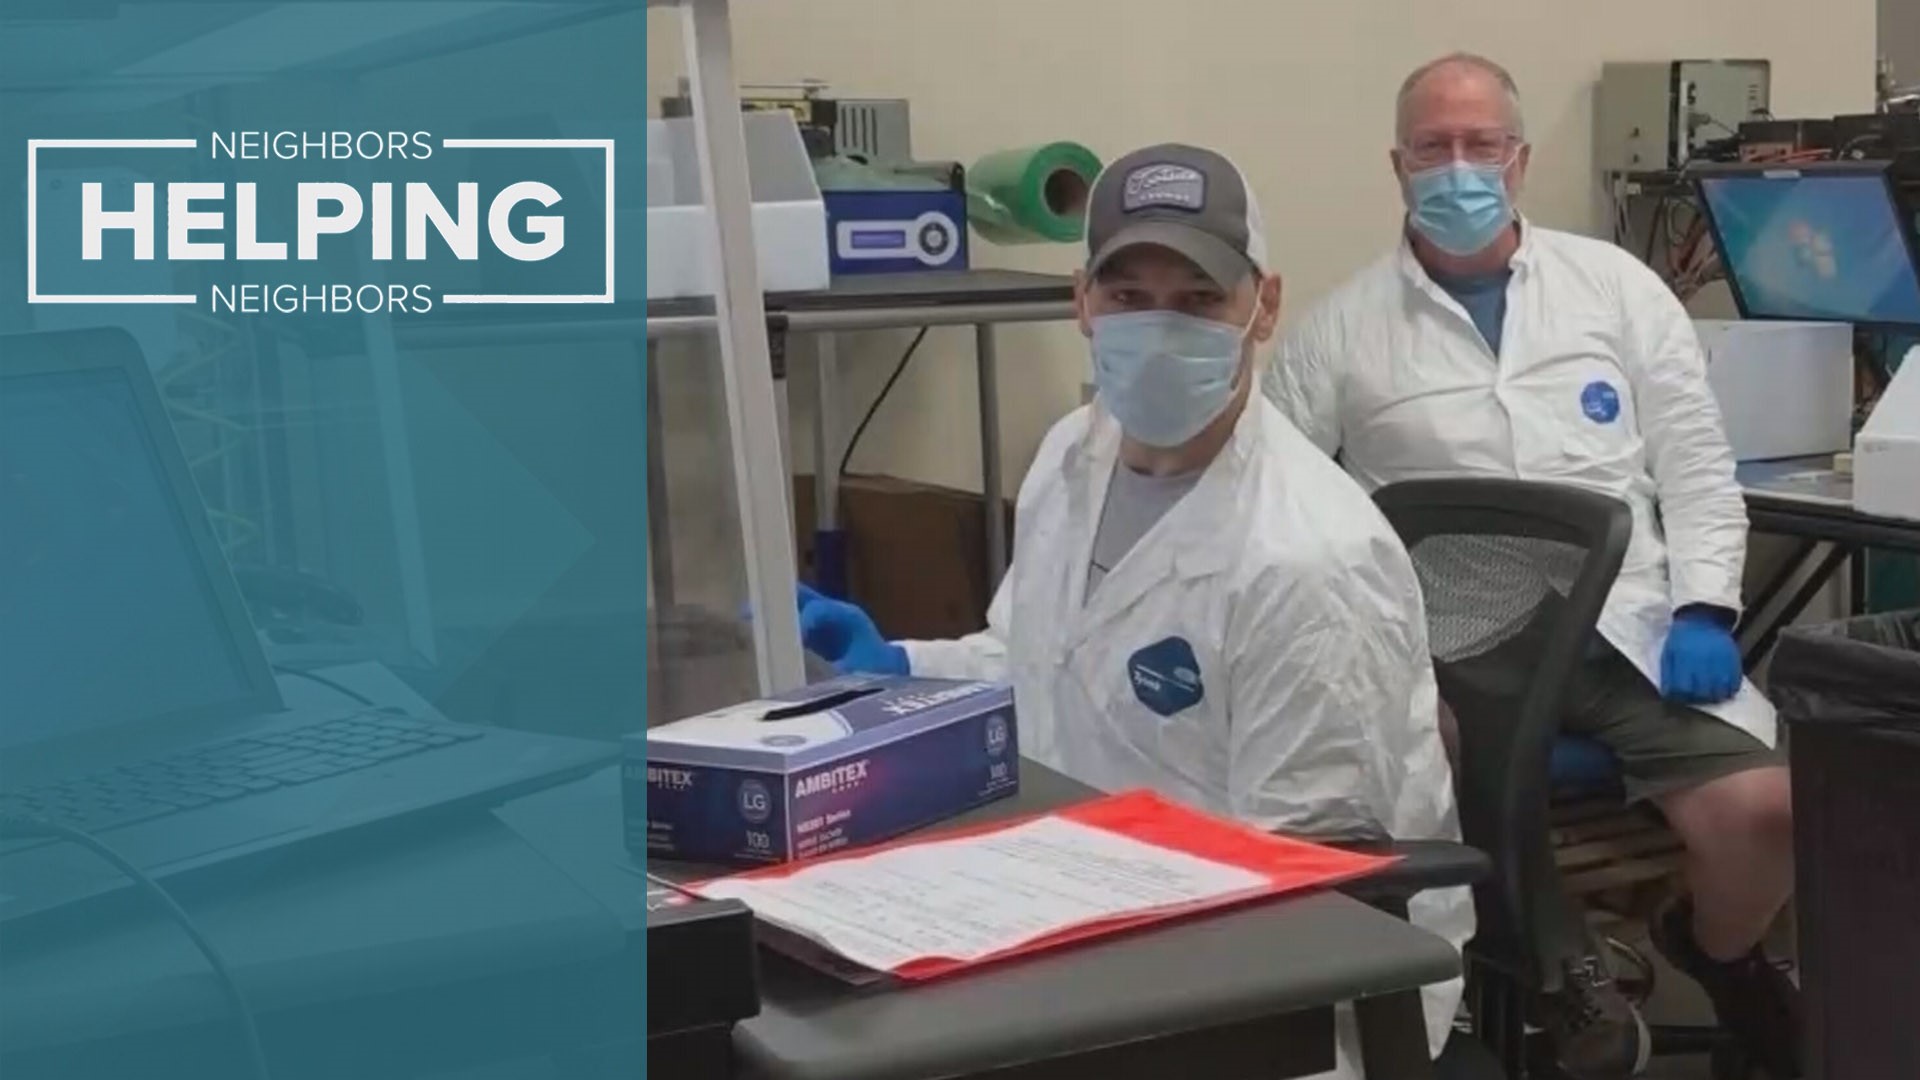 GMN in Seattle has answered Gov. Inslee's call, even before he made it, to make face shields for healthcare workers on the frontlines of the coronavirus fight.